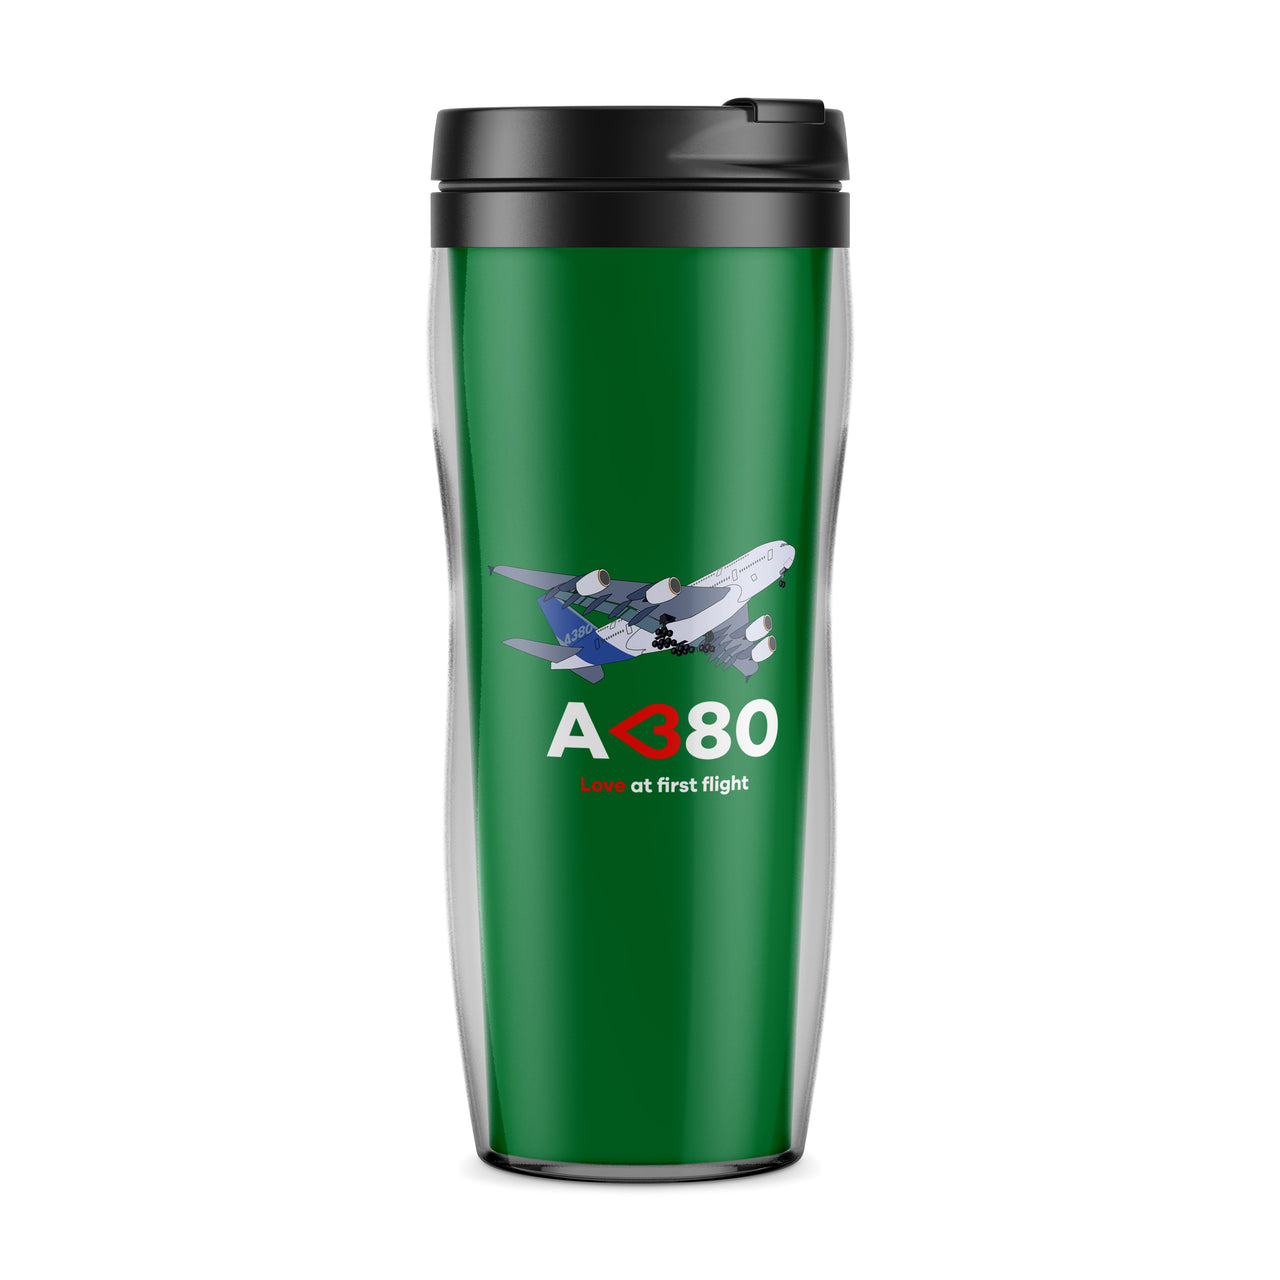 Airbus A380 Love at first flight Designed Plastic Travel Mugs